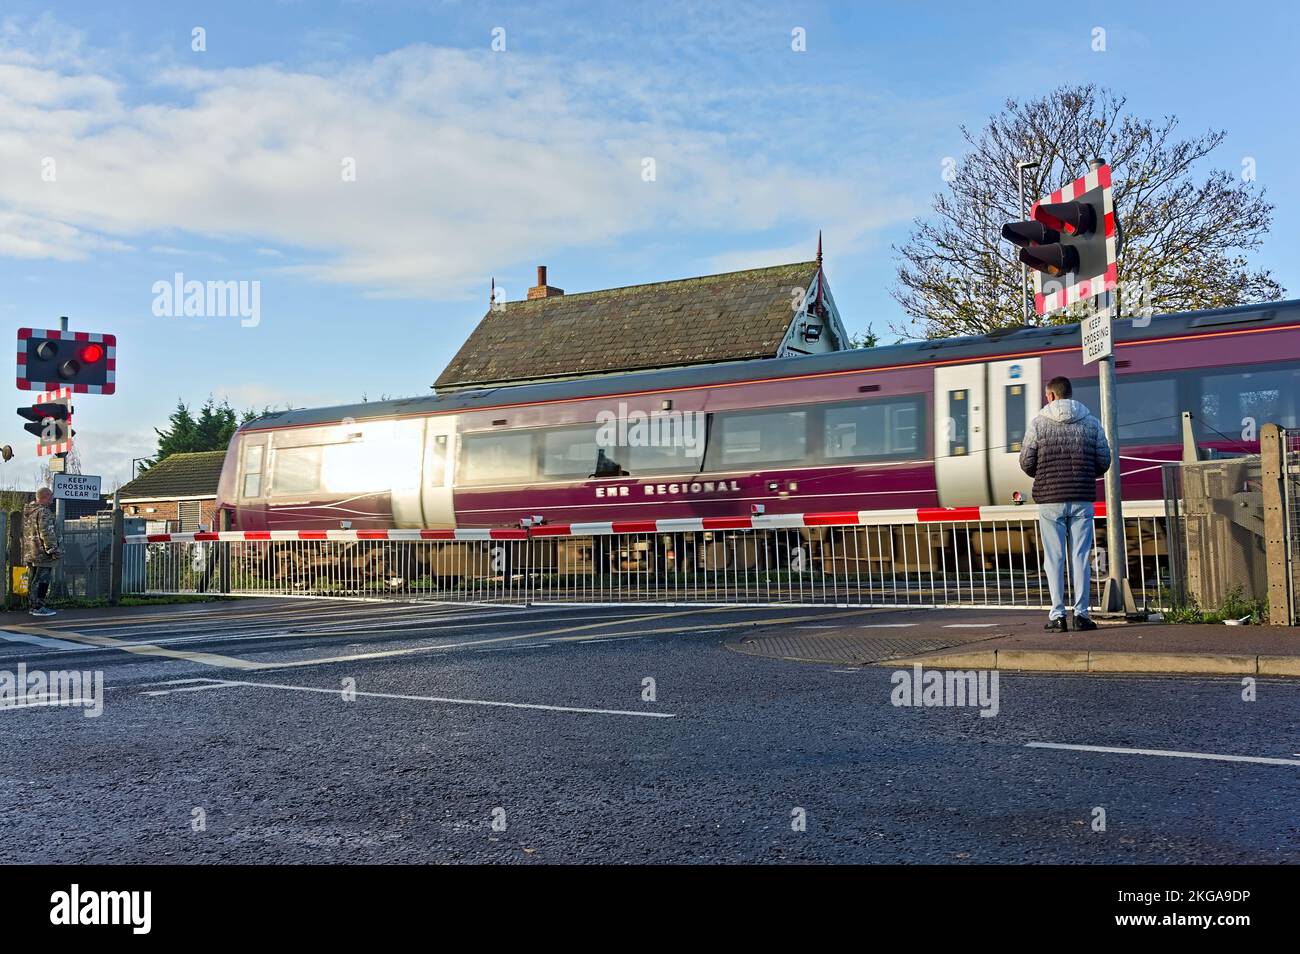 East Midlands regional train passing by an automated railway crossing. Stock Photo